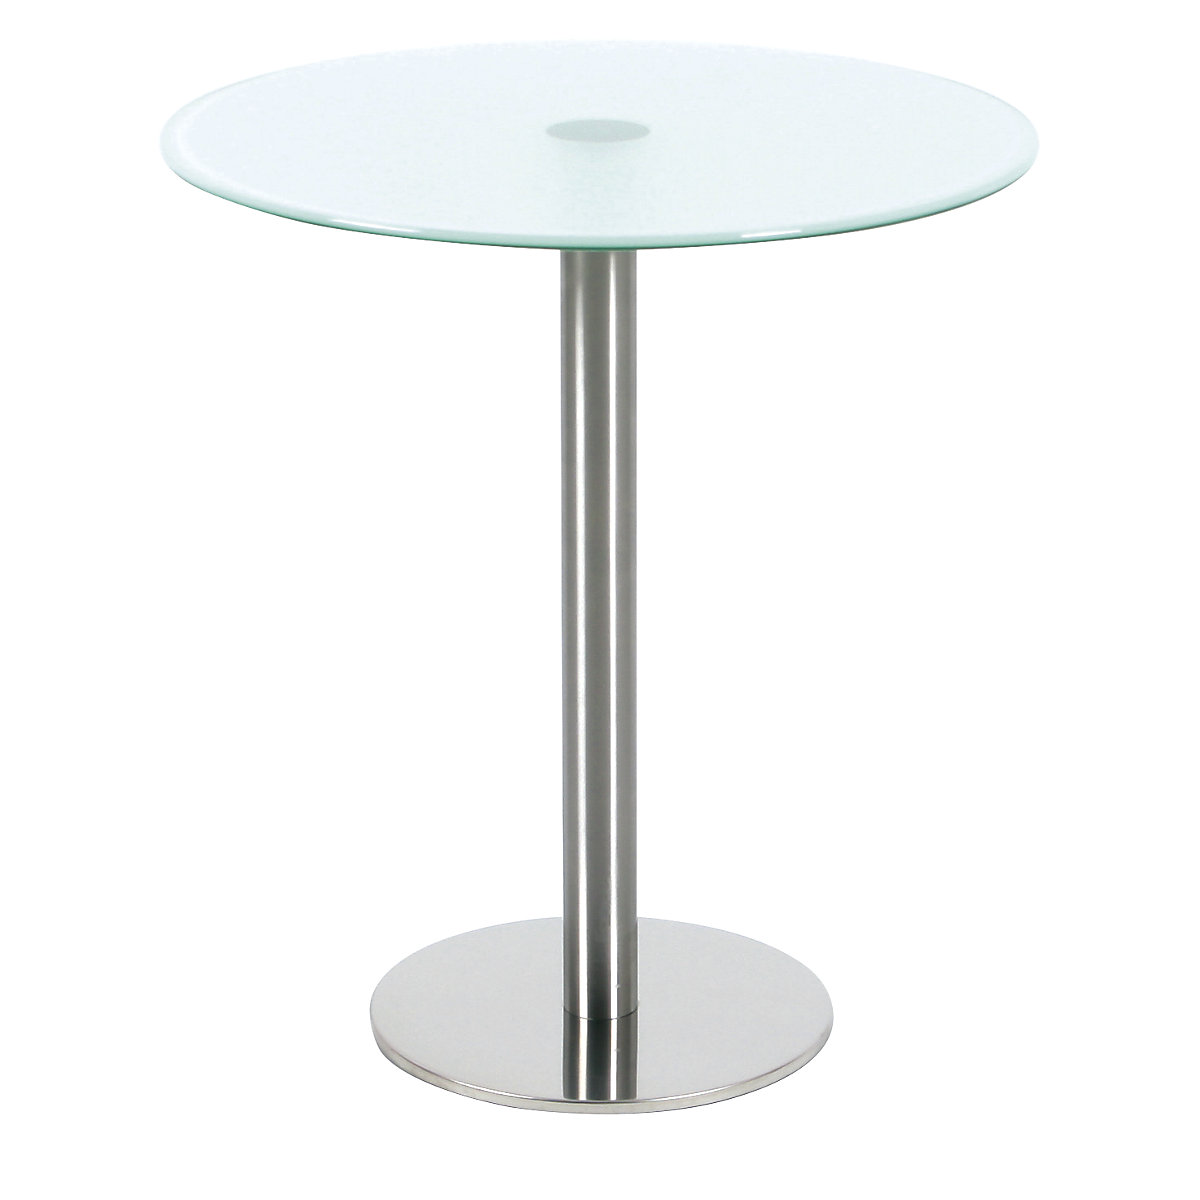 Side table, round, HxØ 550 x 495 mm, glass top with satin finish-2